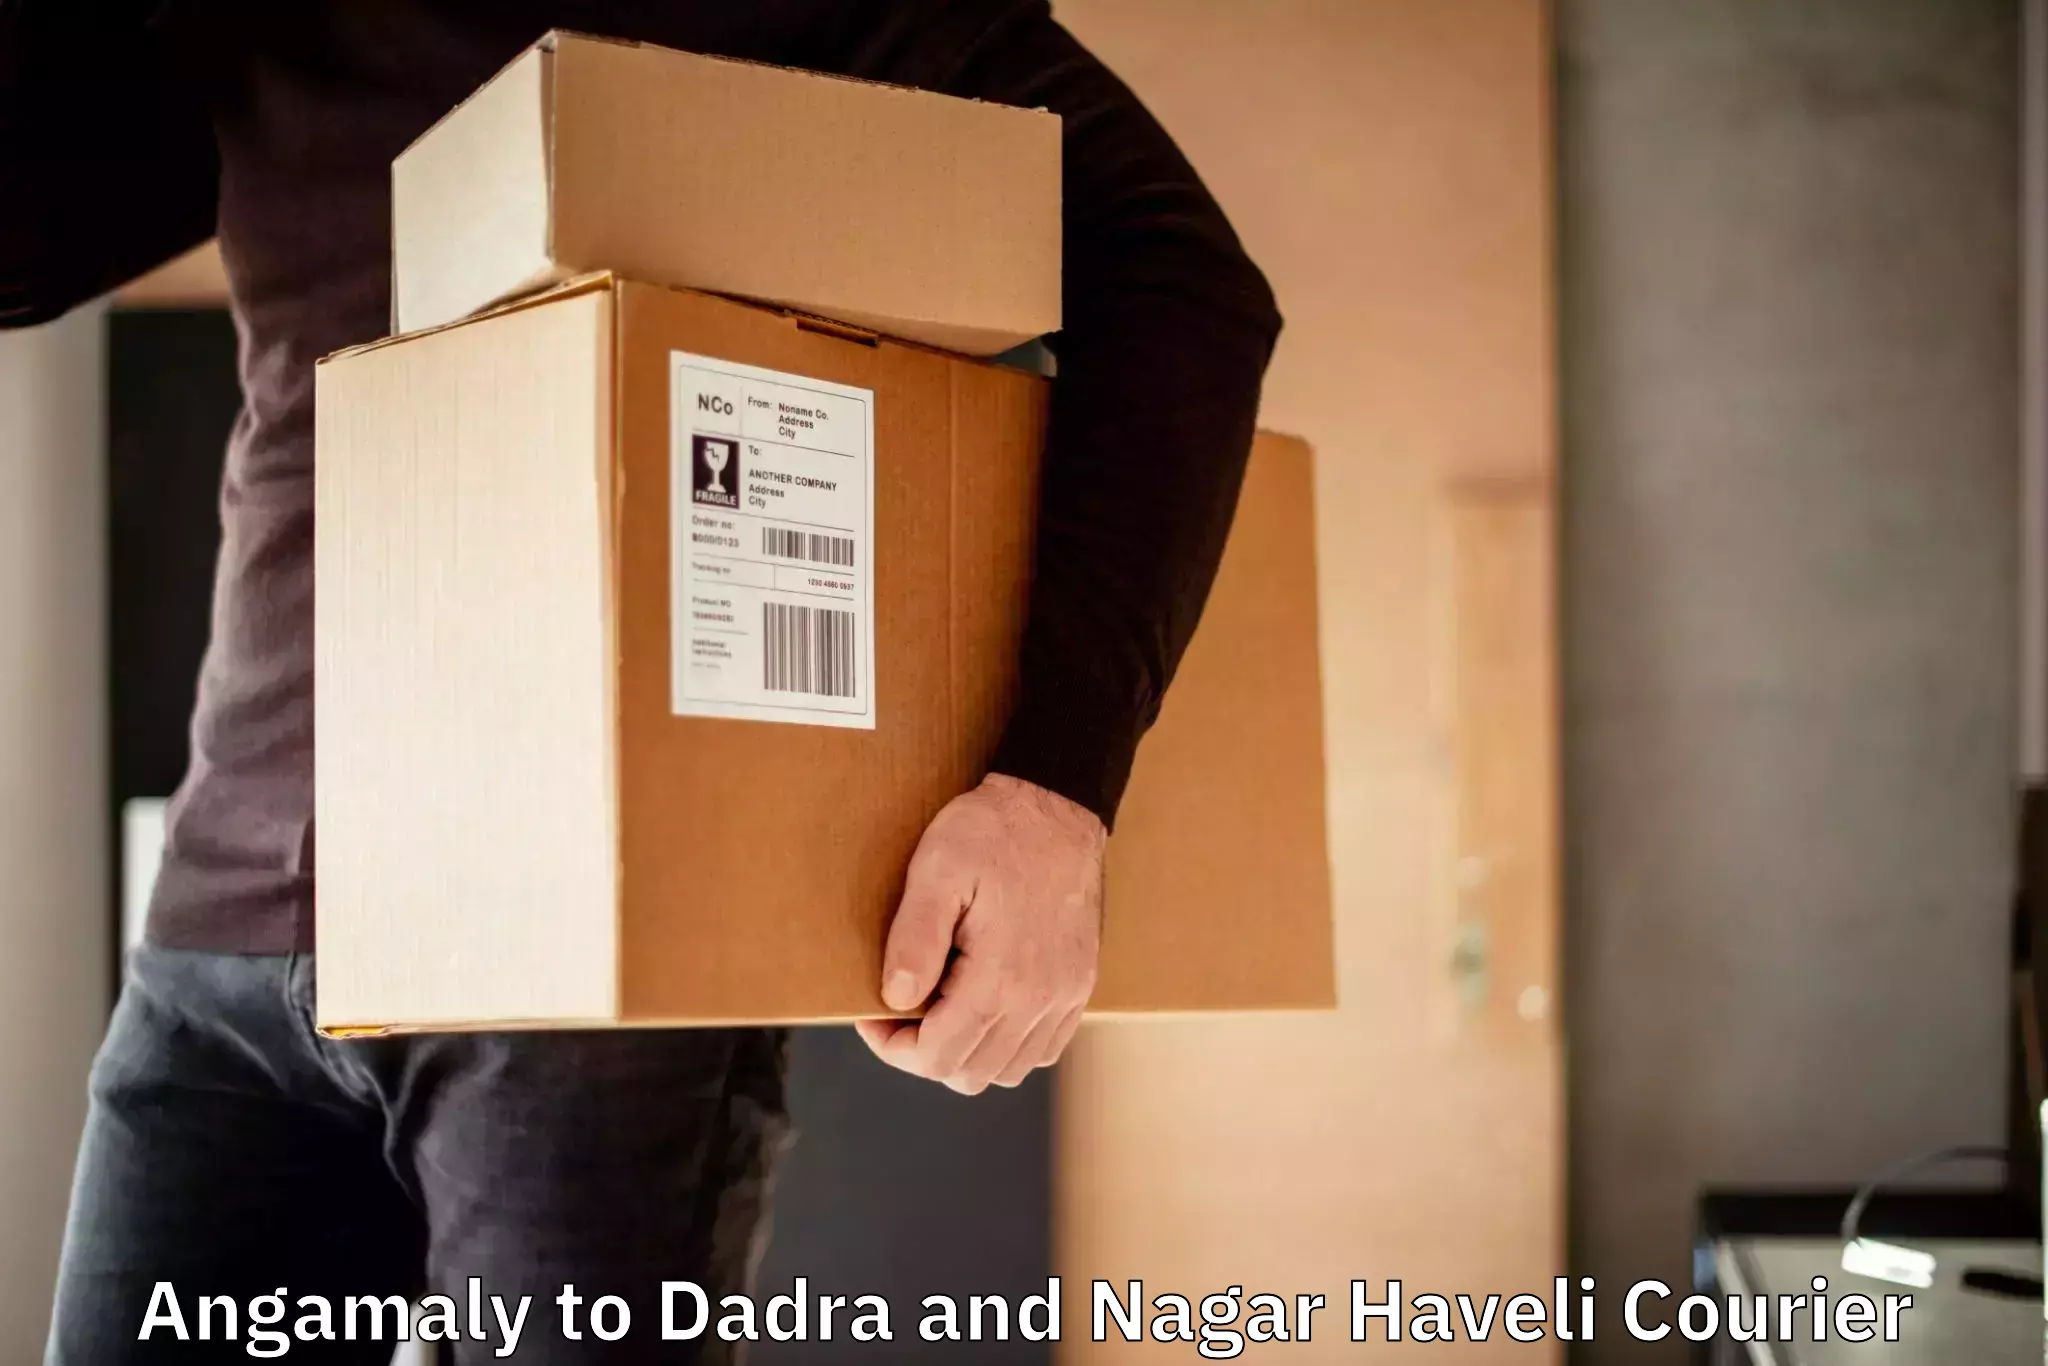 Courier service efficiency Angamaly to Dadra and Nagar Haveli